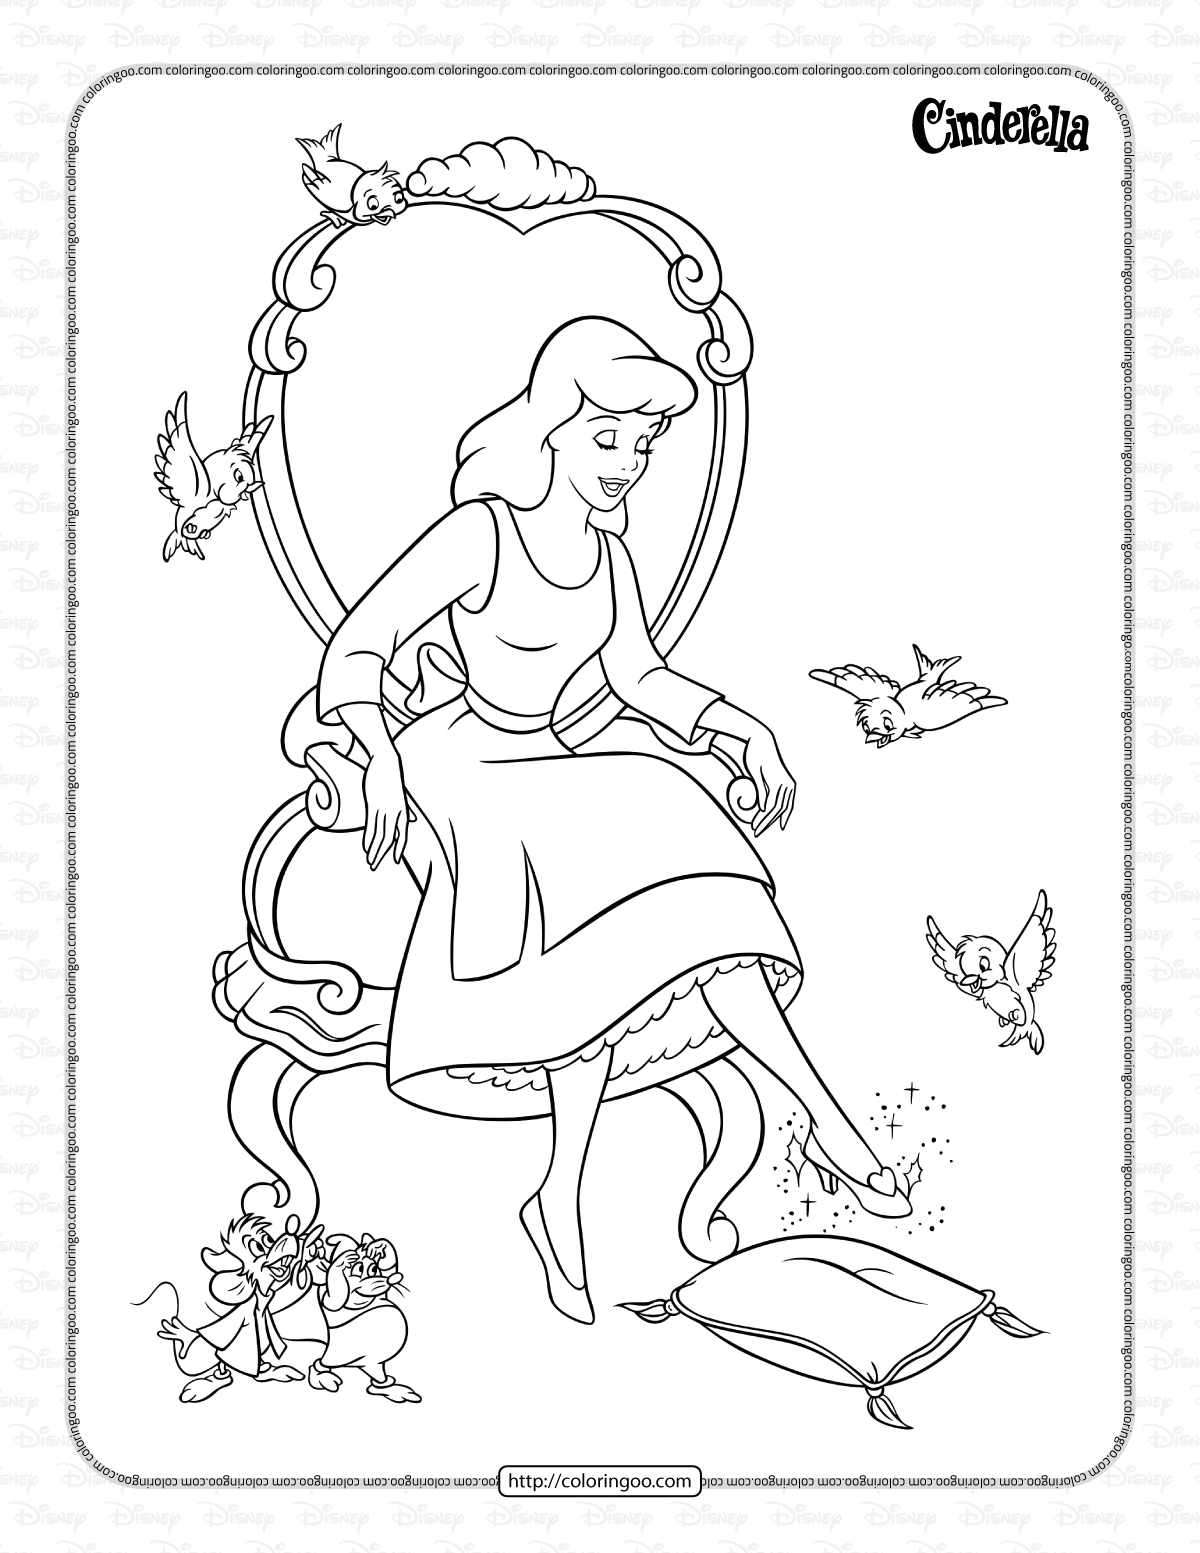 cinderella getting ready for ball coloring page